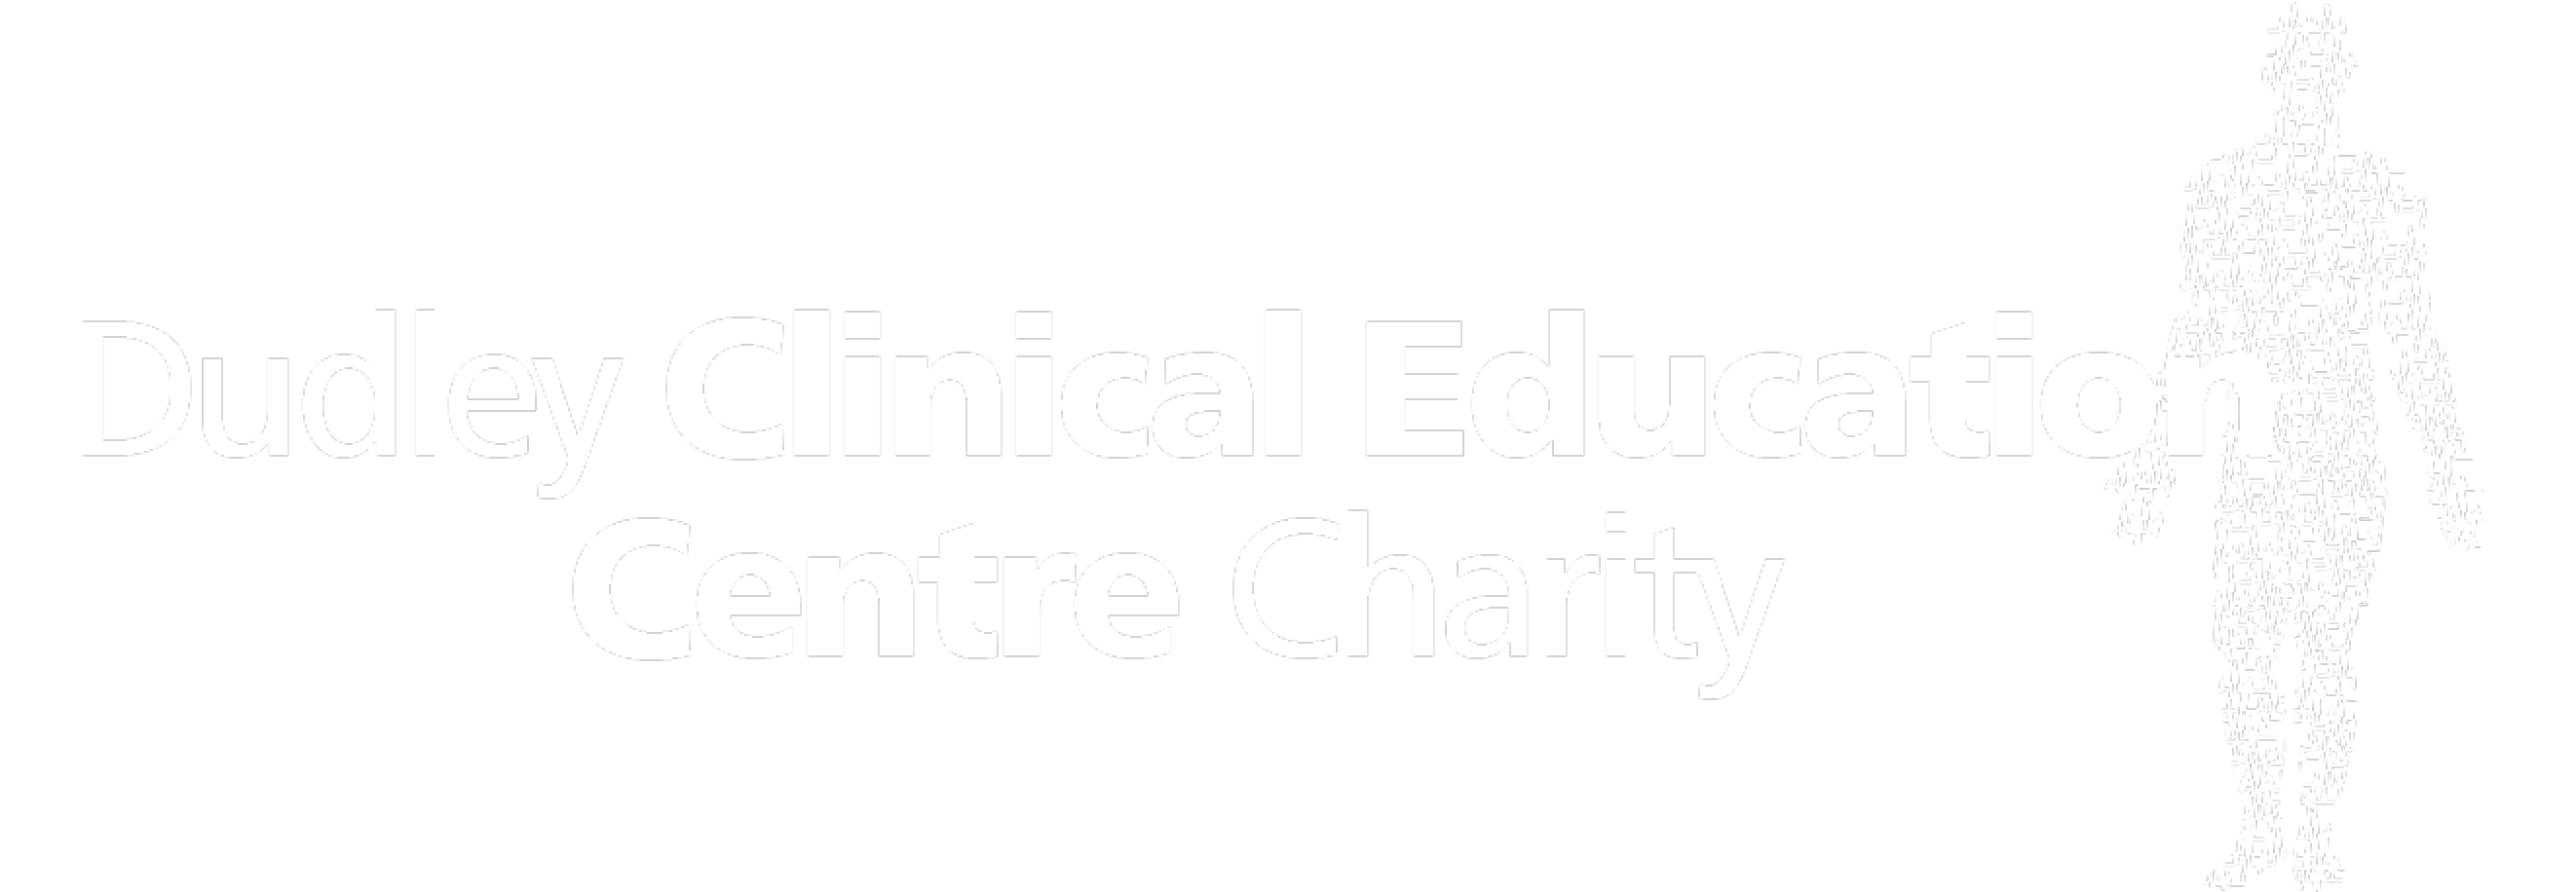 Dudley Clinical Education charity logo